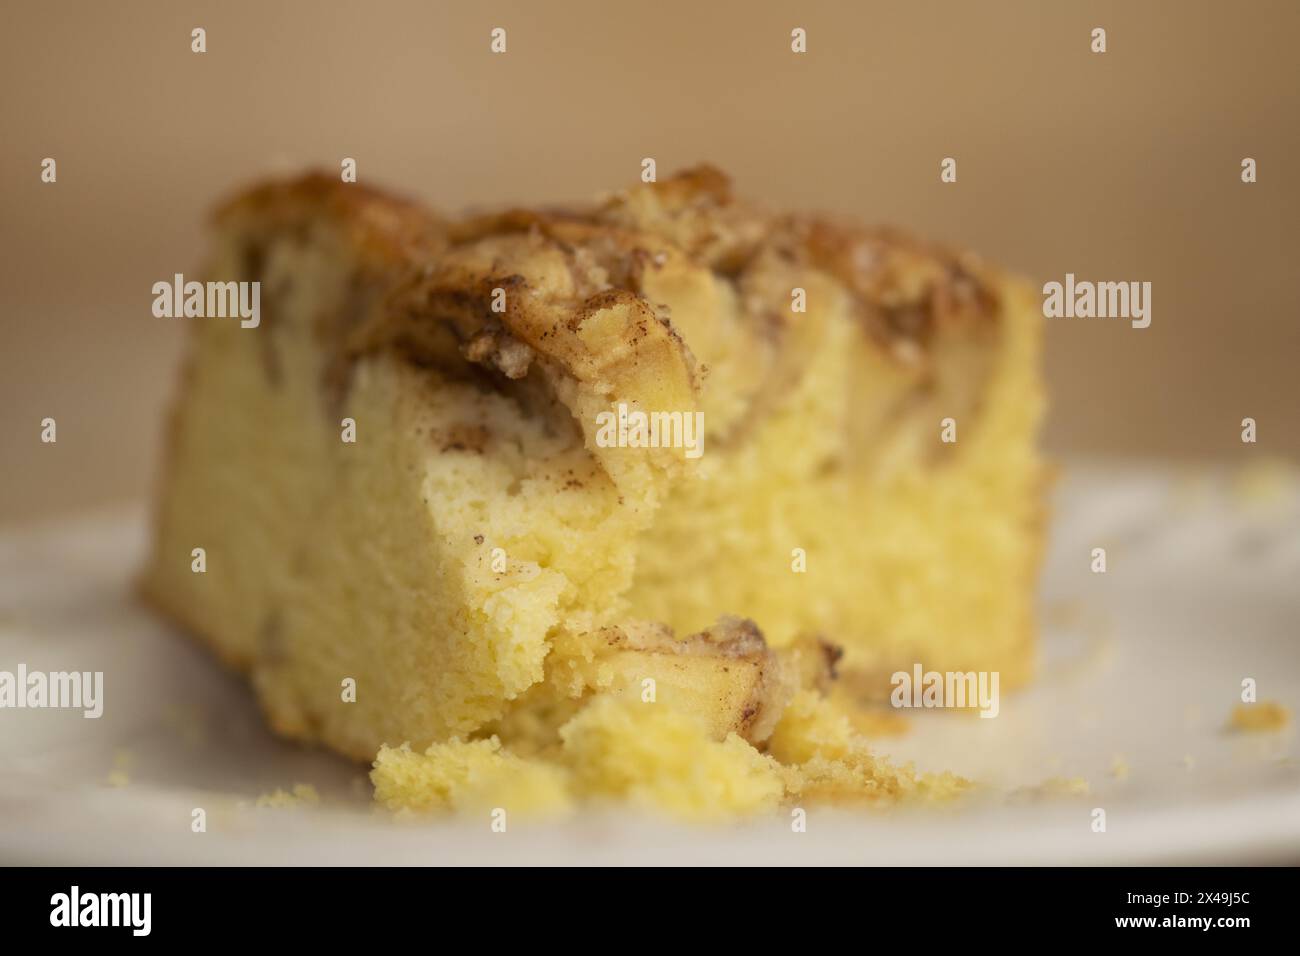 slice of homemade apple pie on a wooden table Stock Photo